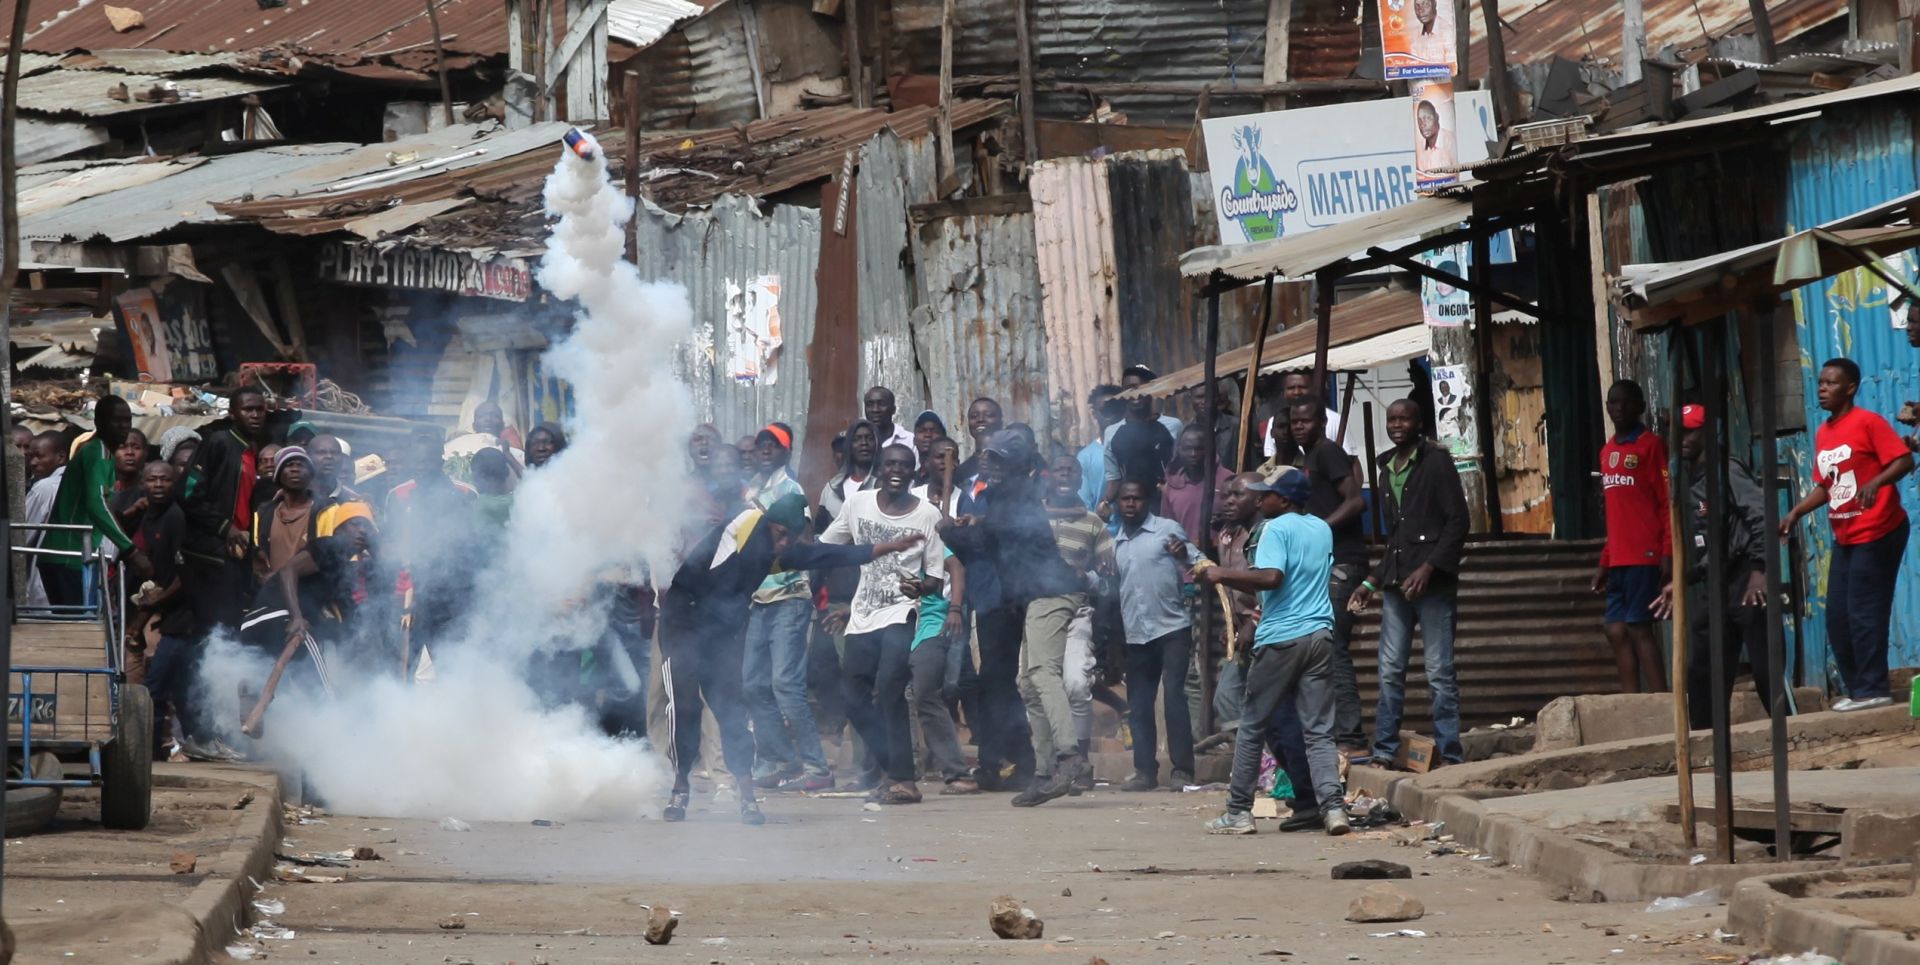 epa06139751 Supporters of the opposition leader Raila Odinga shout slogans as they throw back a tear gas canister thrown to them by riot police officers  during a protest in Mathare slum, in Nairobi, Kenya, 12 August 2017. On 11 August the electoral body decleared incumbent Uhuru Kenyatta as the winner in the presidential election. According to the vote count Uhuru beat opposition leader Raila Odinga. Odinga and other opposition leaders are disputing the results. Police are beefing up security on Nairobi streets as the fear of the post-election violence looms.  EPA/DANIEL IRUNGU